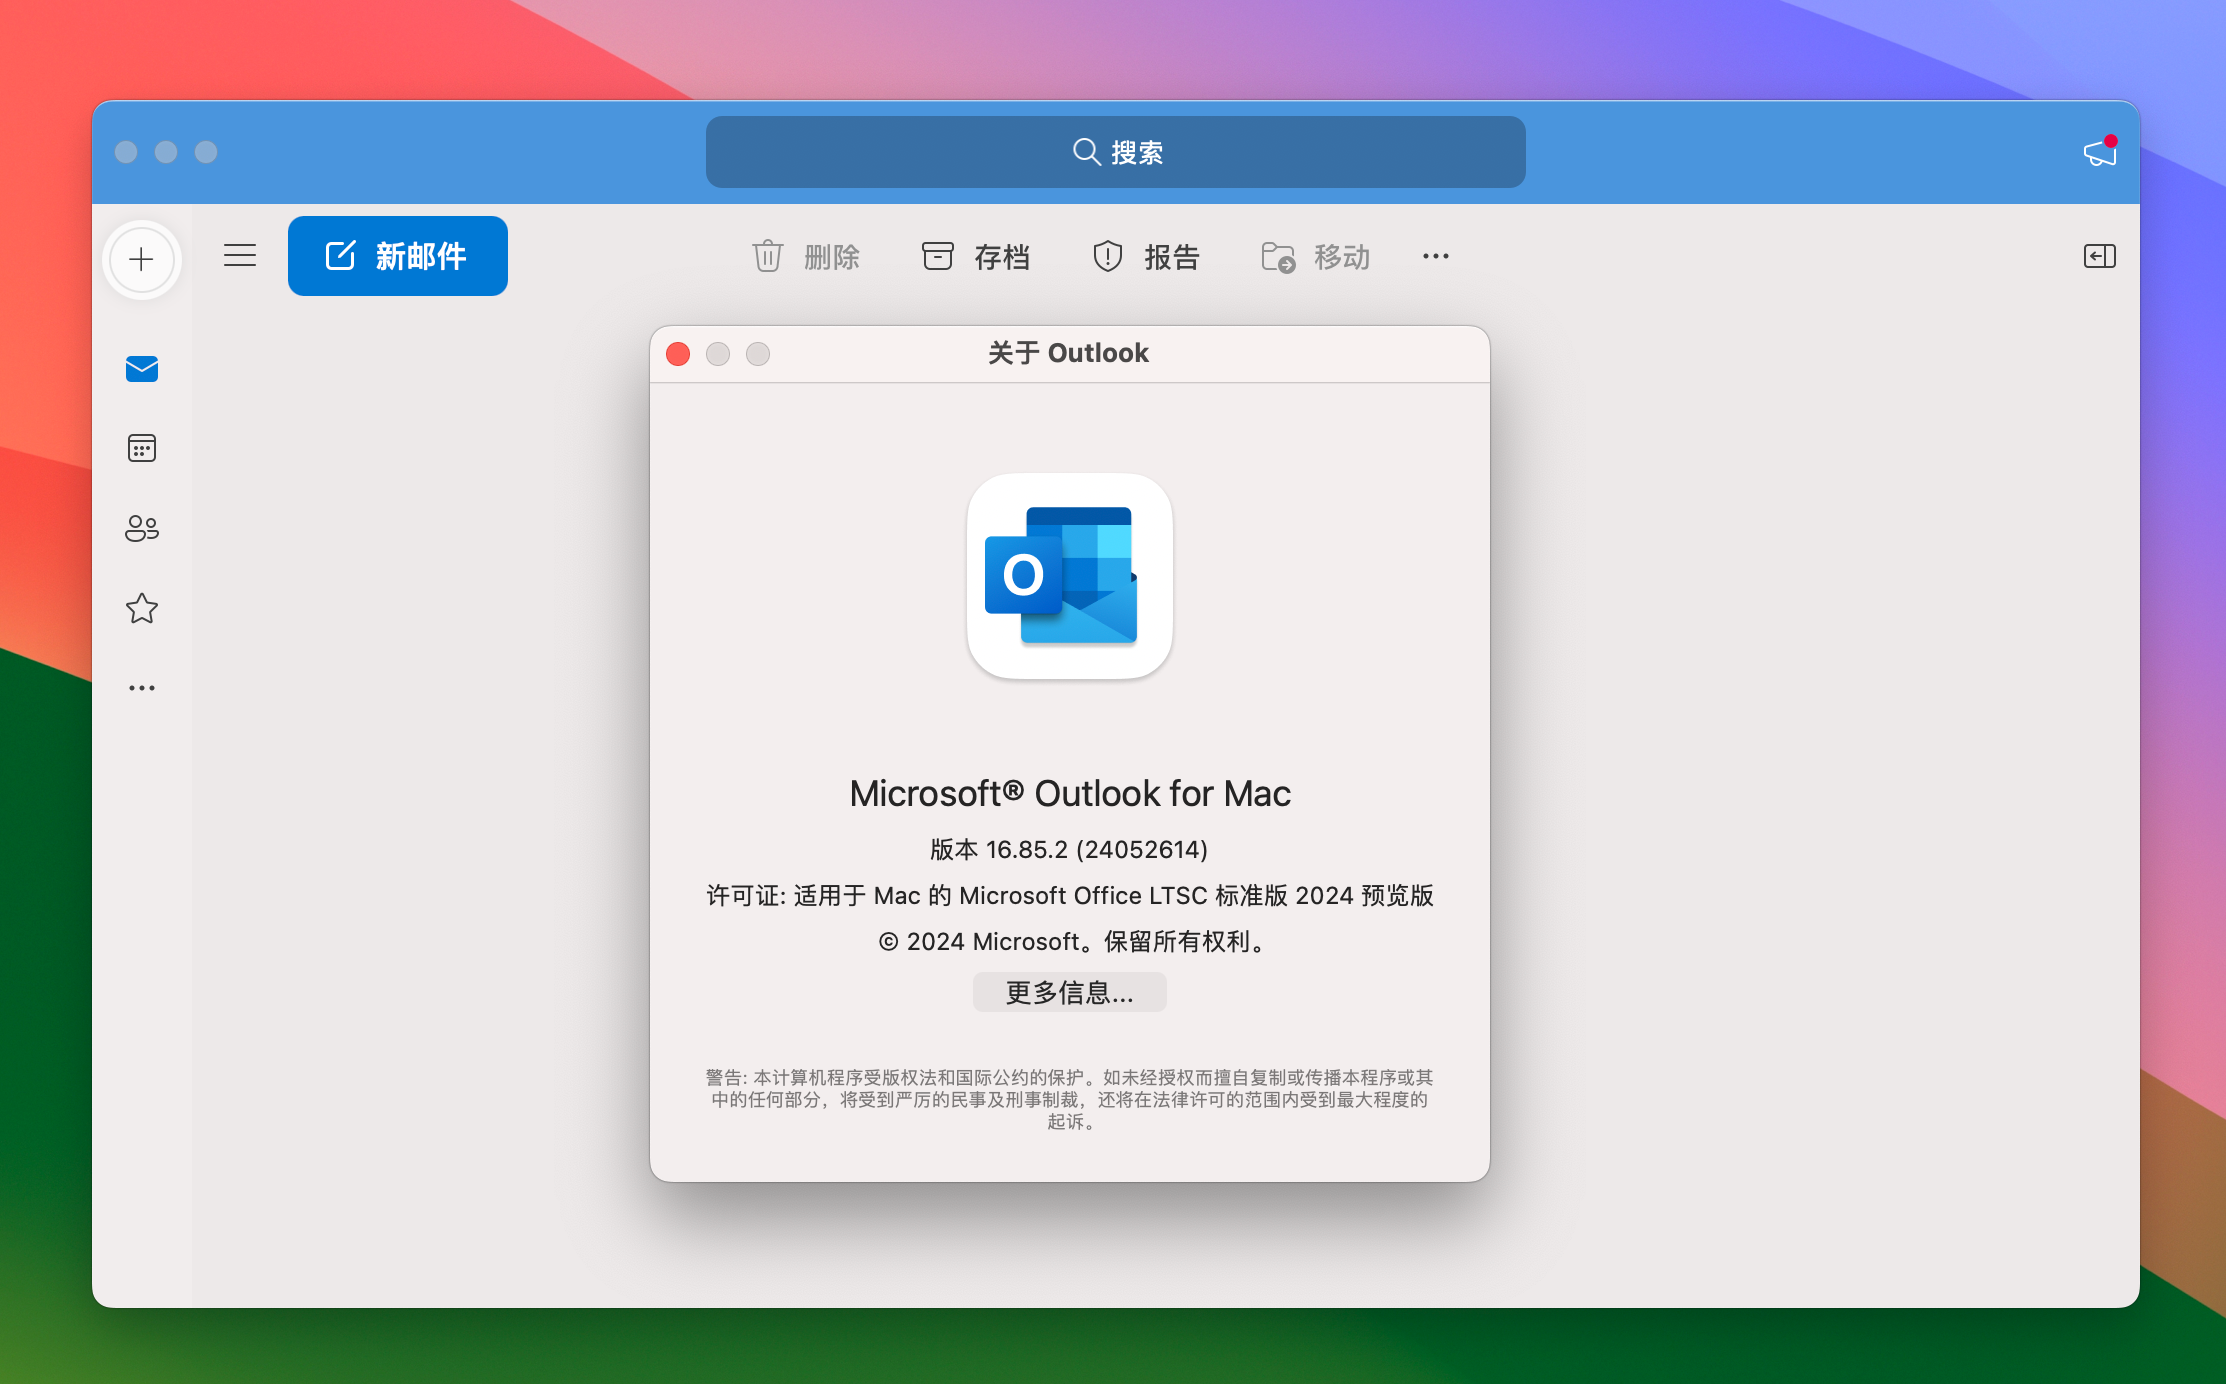 Microsoft Outlook LTSC 2021 for Mac v16.85.2 outlook邮箱 免激活下载-1